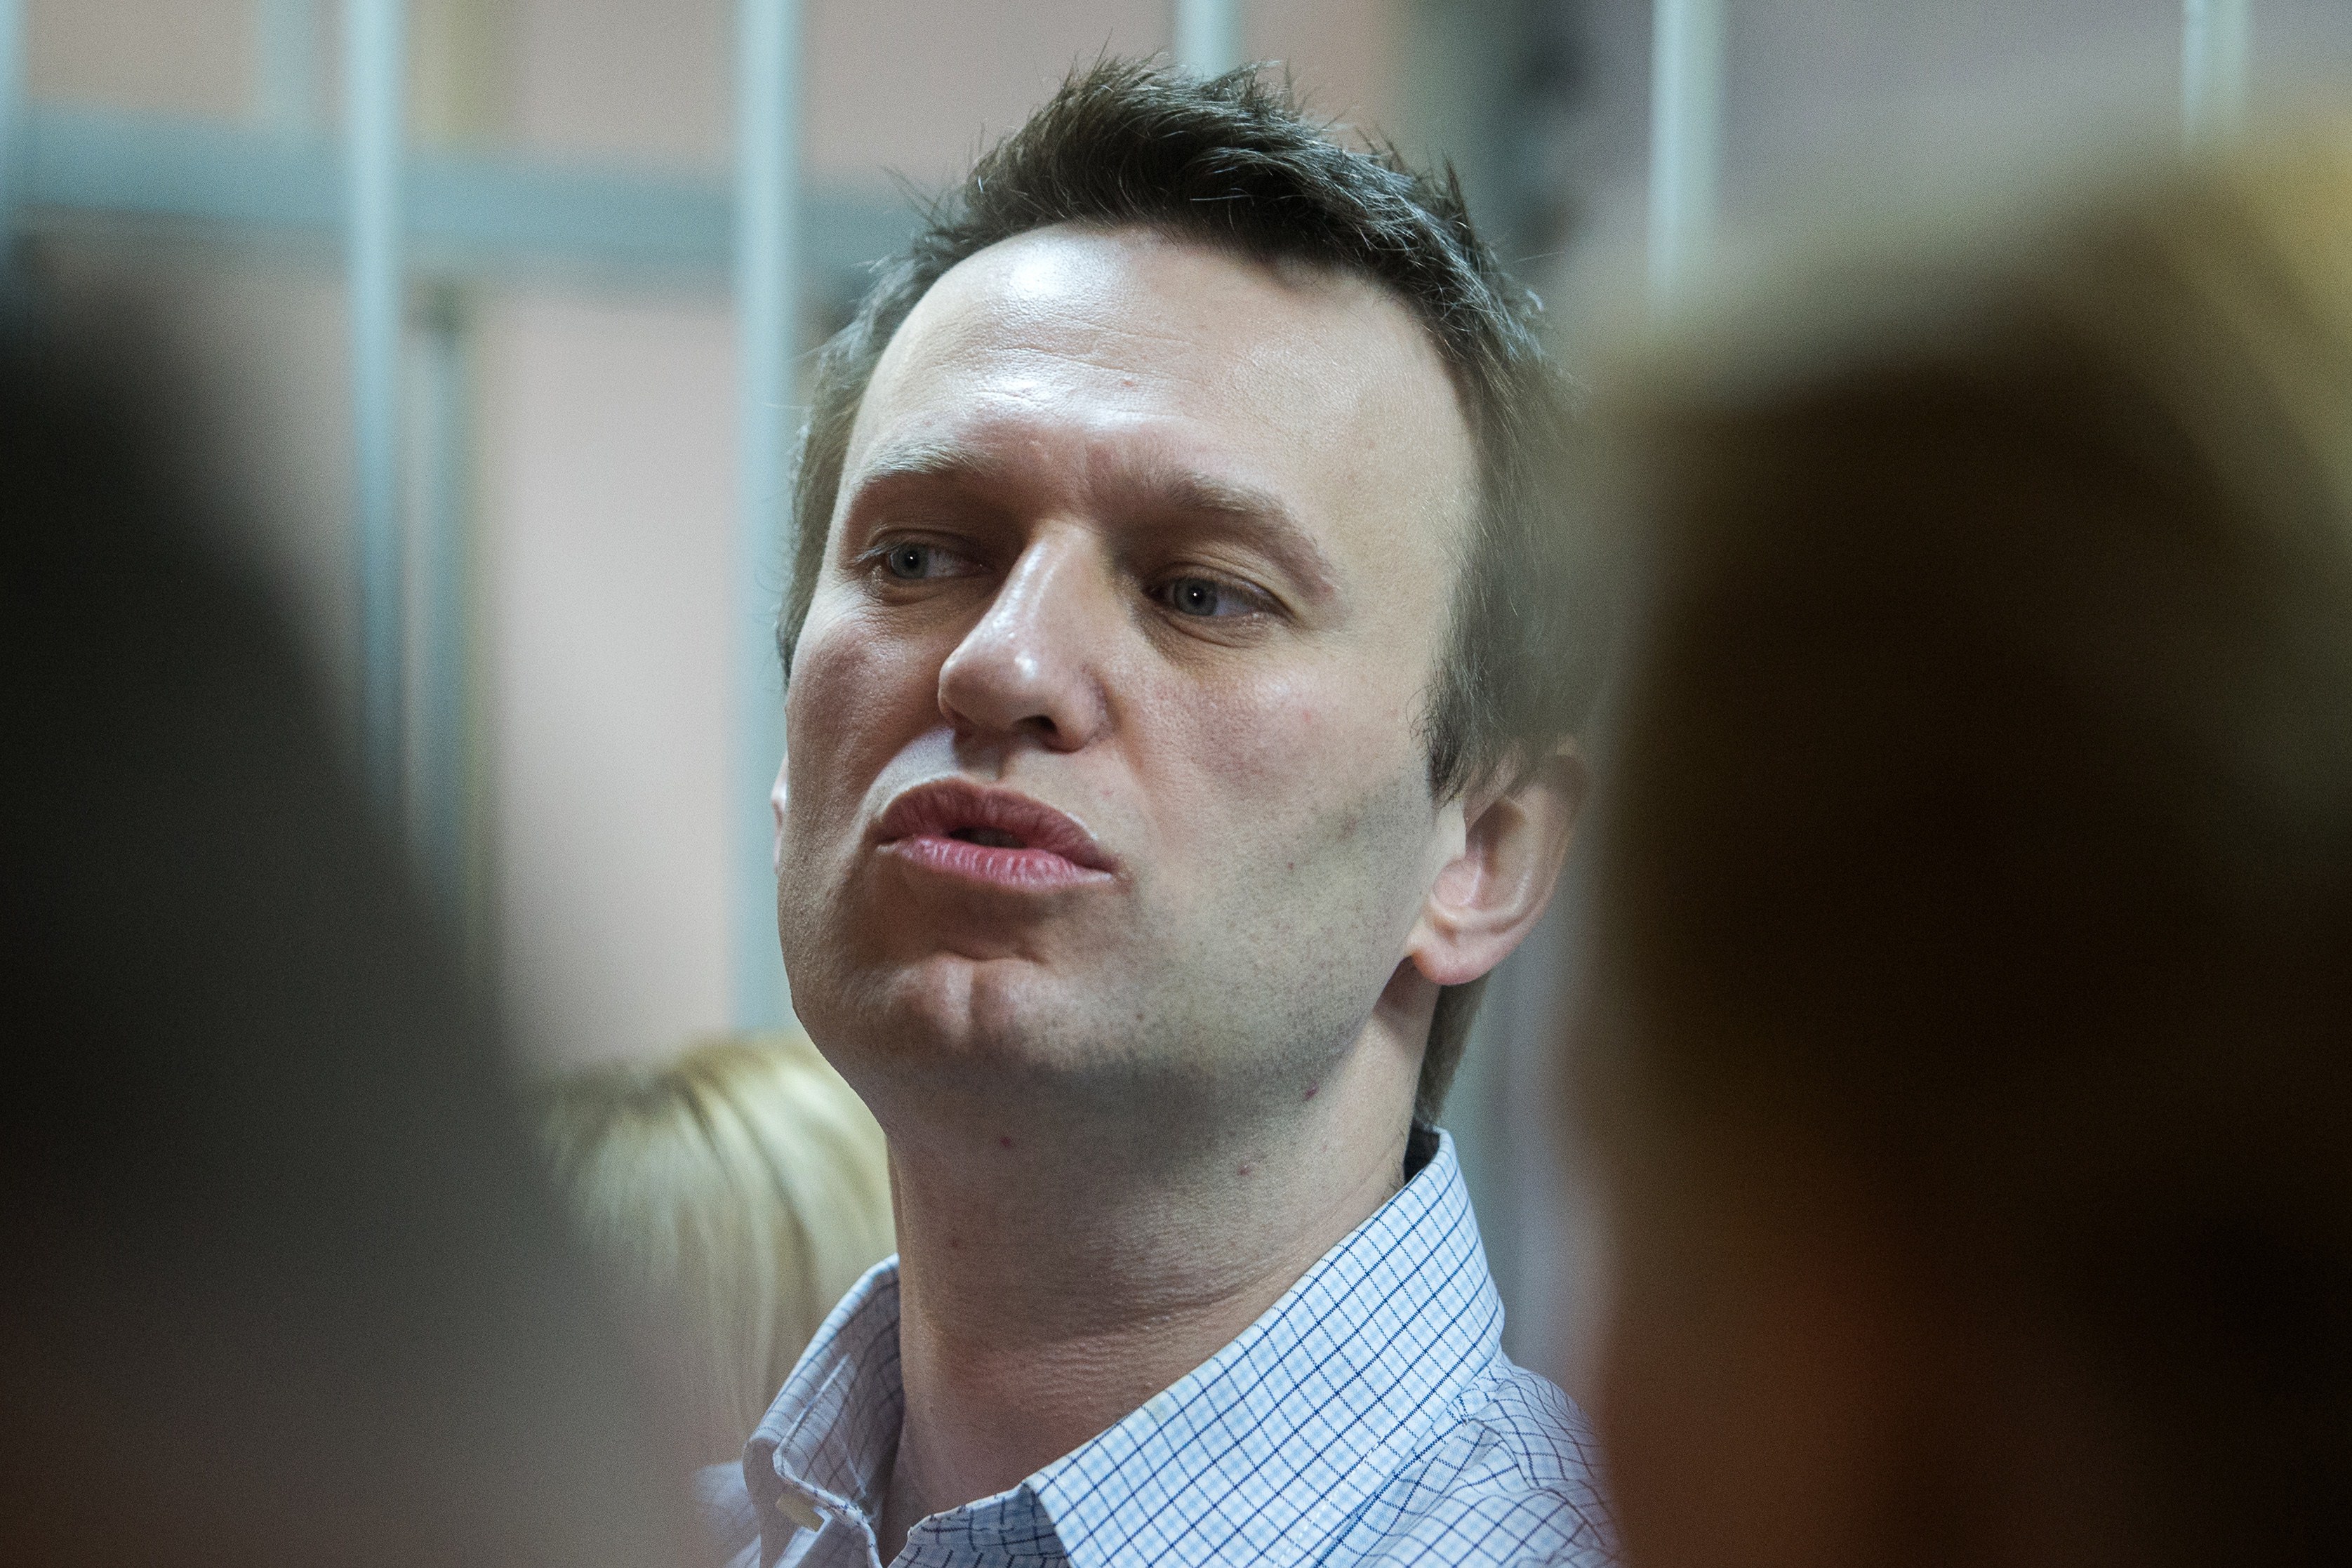 Russian anti-Kremlin opposition leader Alexei Navalny speaks as he attends the verdict announcement of his fraud trial at a court in Moscow on December 30, 2014. (Dmitry Serebryakov—AFP/Getty Images)